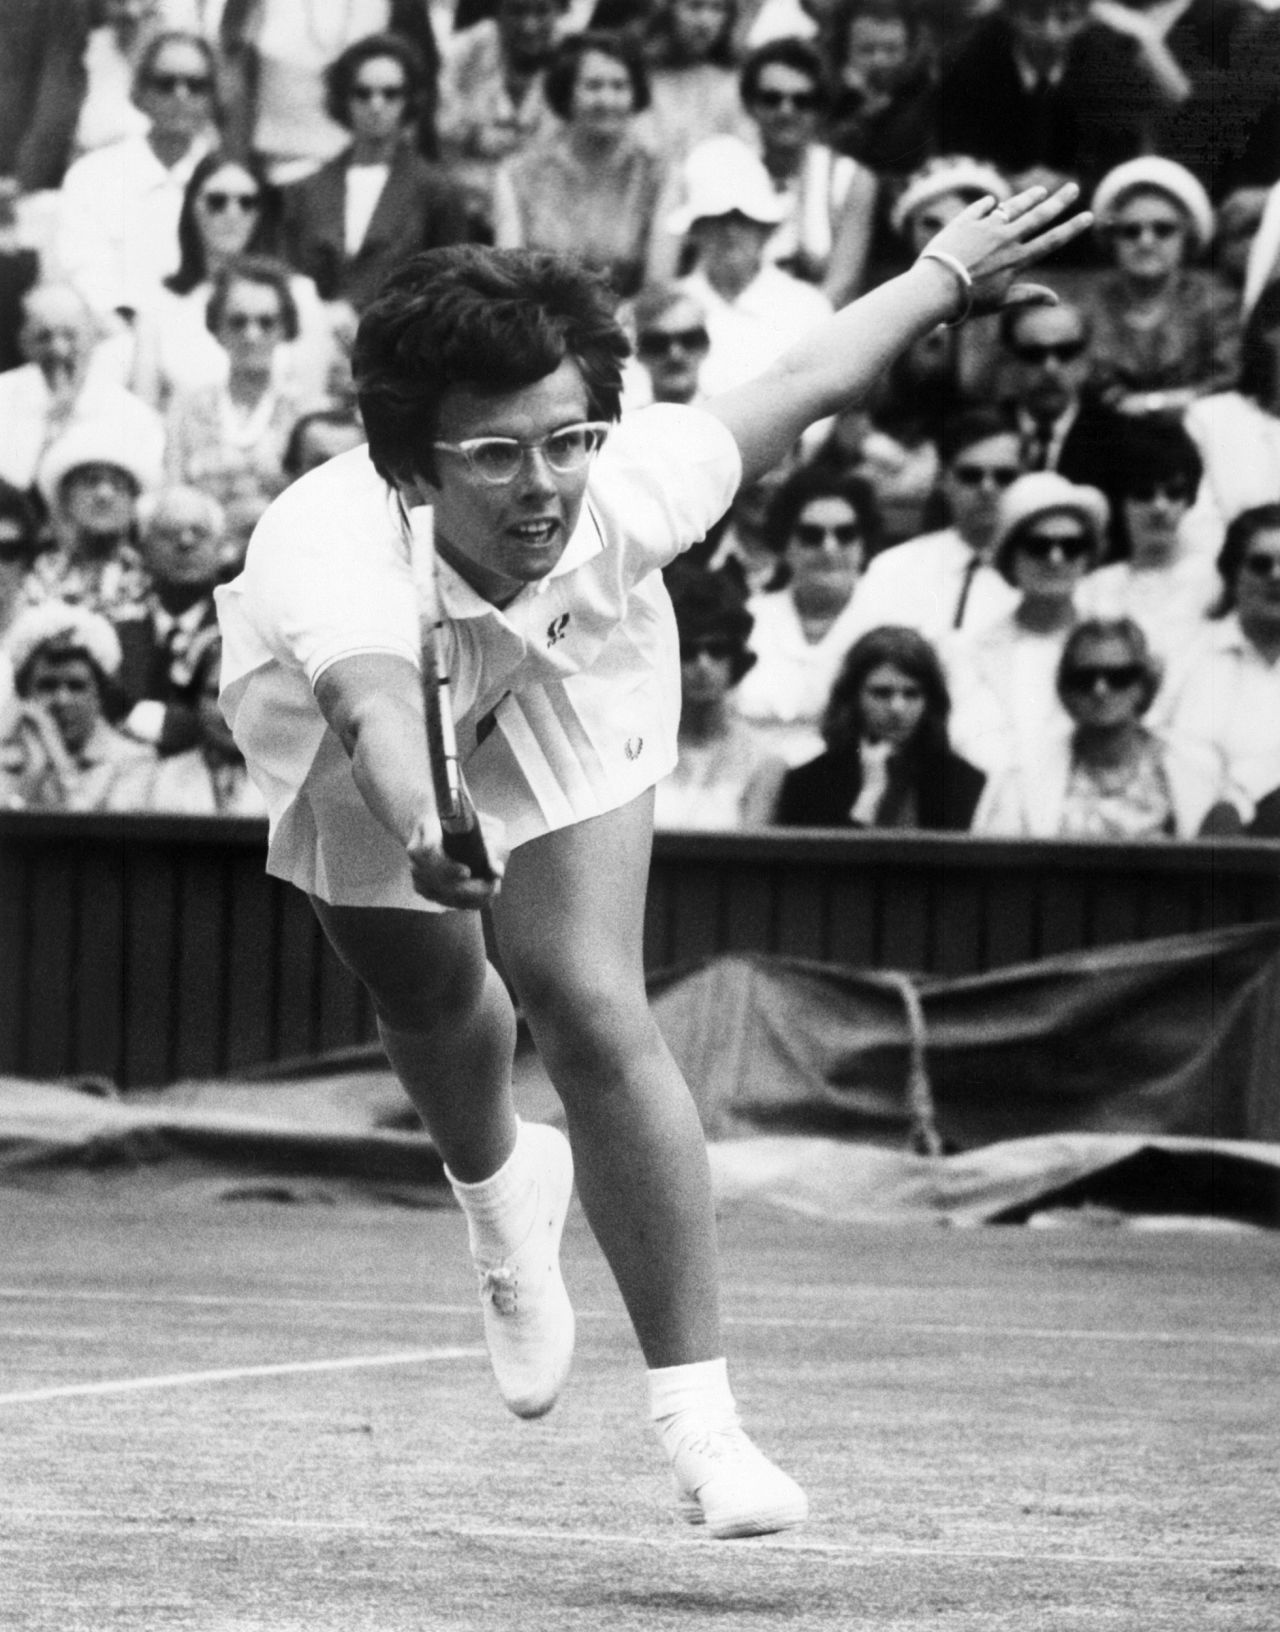 Back on the court, legendary American player Billie-Jean King didn't let a pair of oversized spectacles stop her reaching for success in the late 1960s.<br />King won the women's singles title at Wimbledon six times, the U.S. Open four times, and the Roland Garros tournament in Paris once.